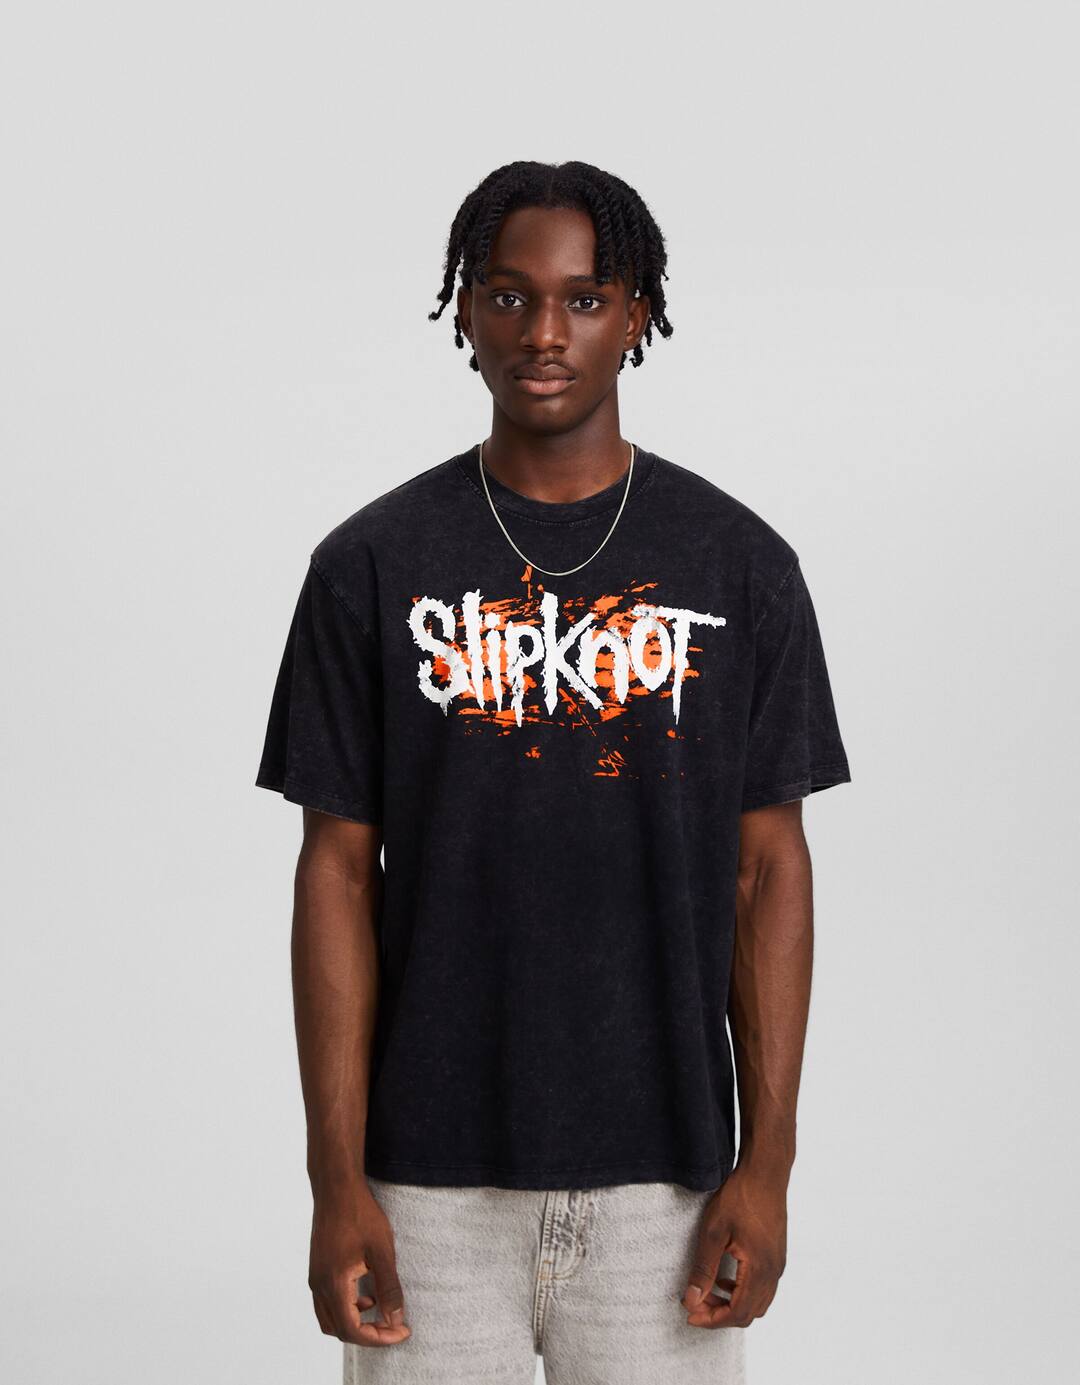 Slipknot print T-shirt with short sleeves and a boxy fit